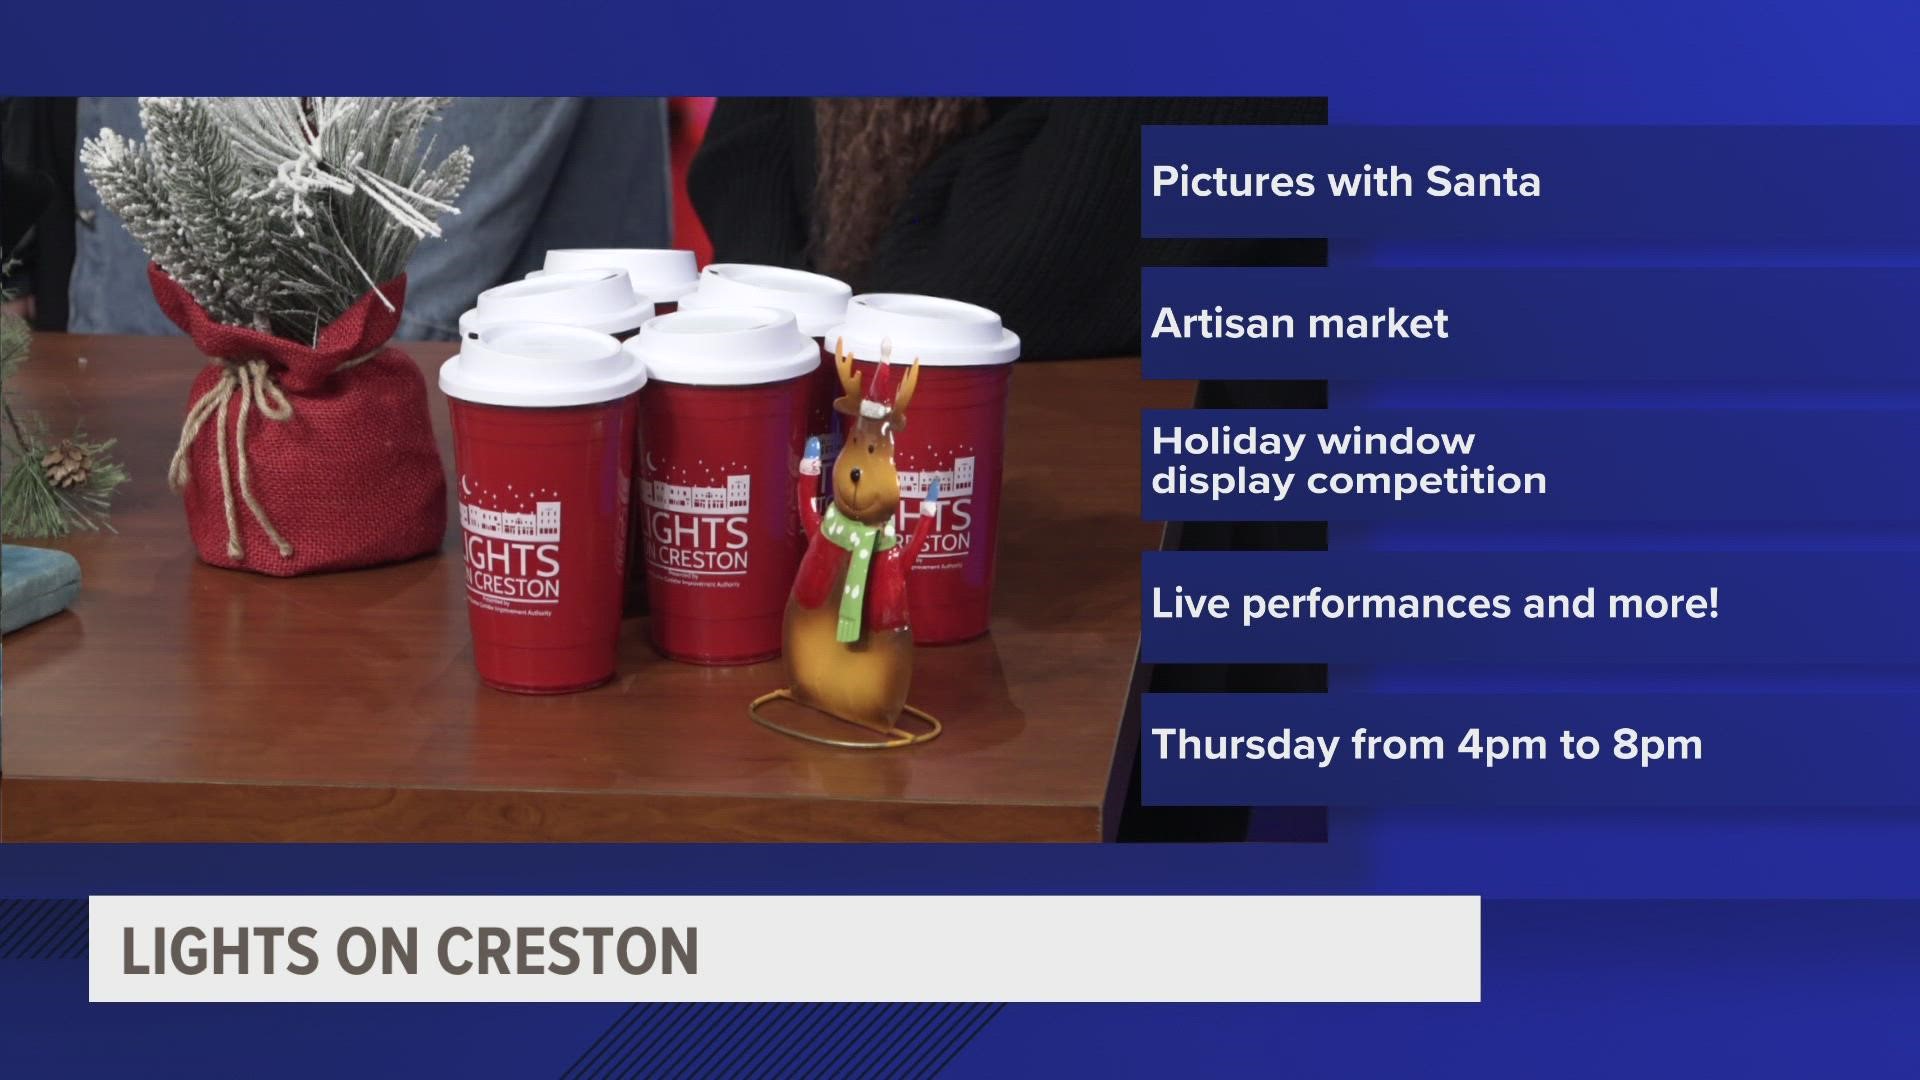 Lights on Creston is kickstarting holiday festivities on Thursday, complete with local business markets, special food and drinks and a visit from Santa!